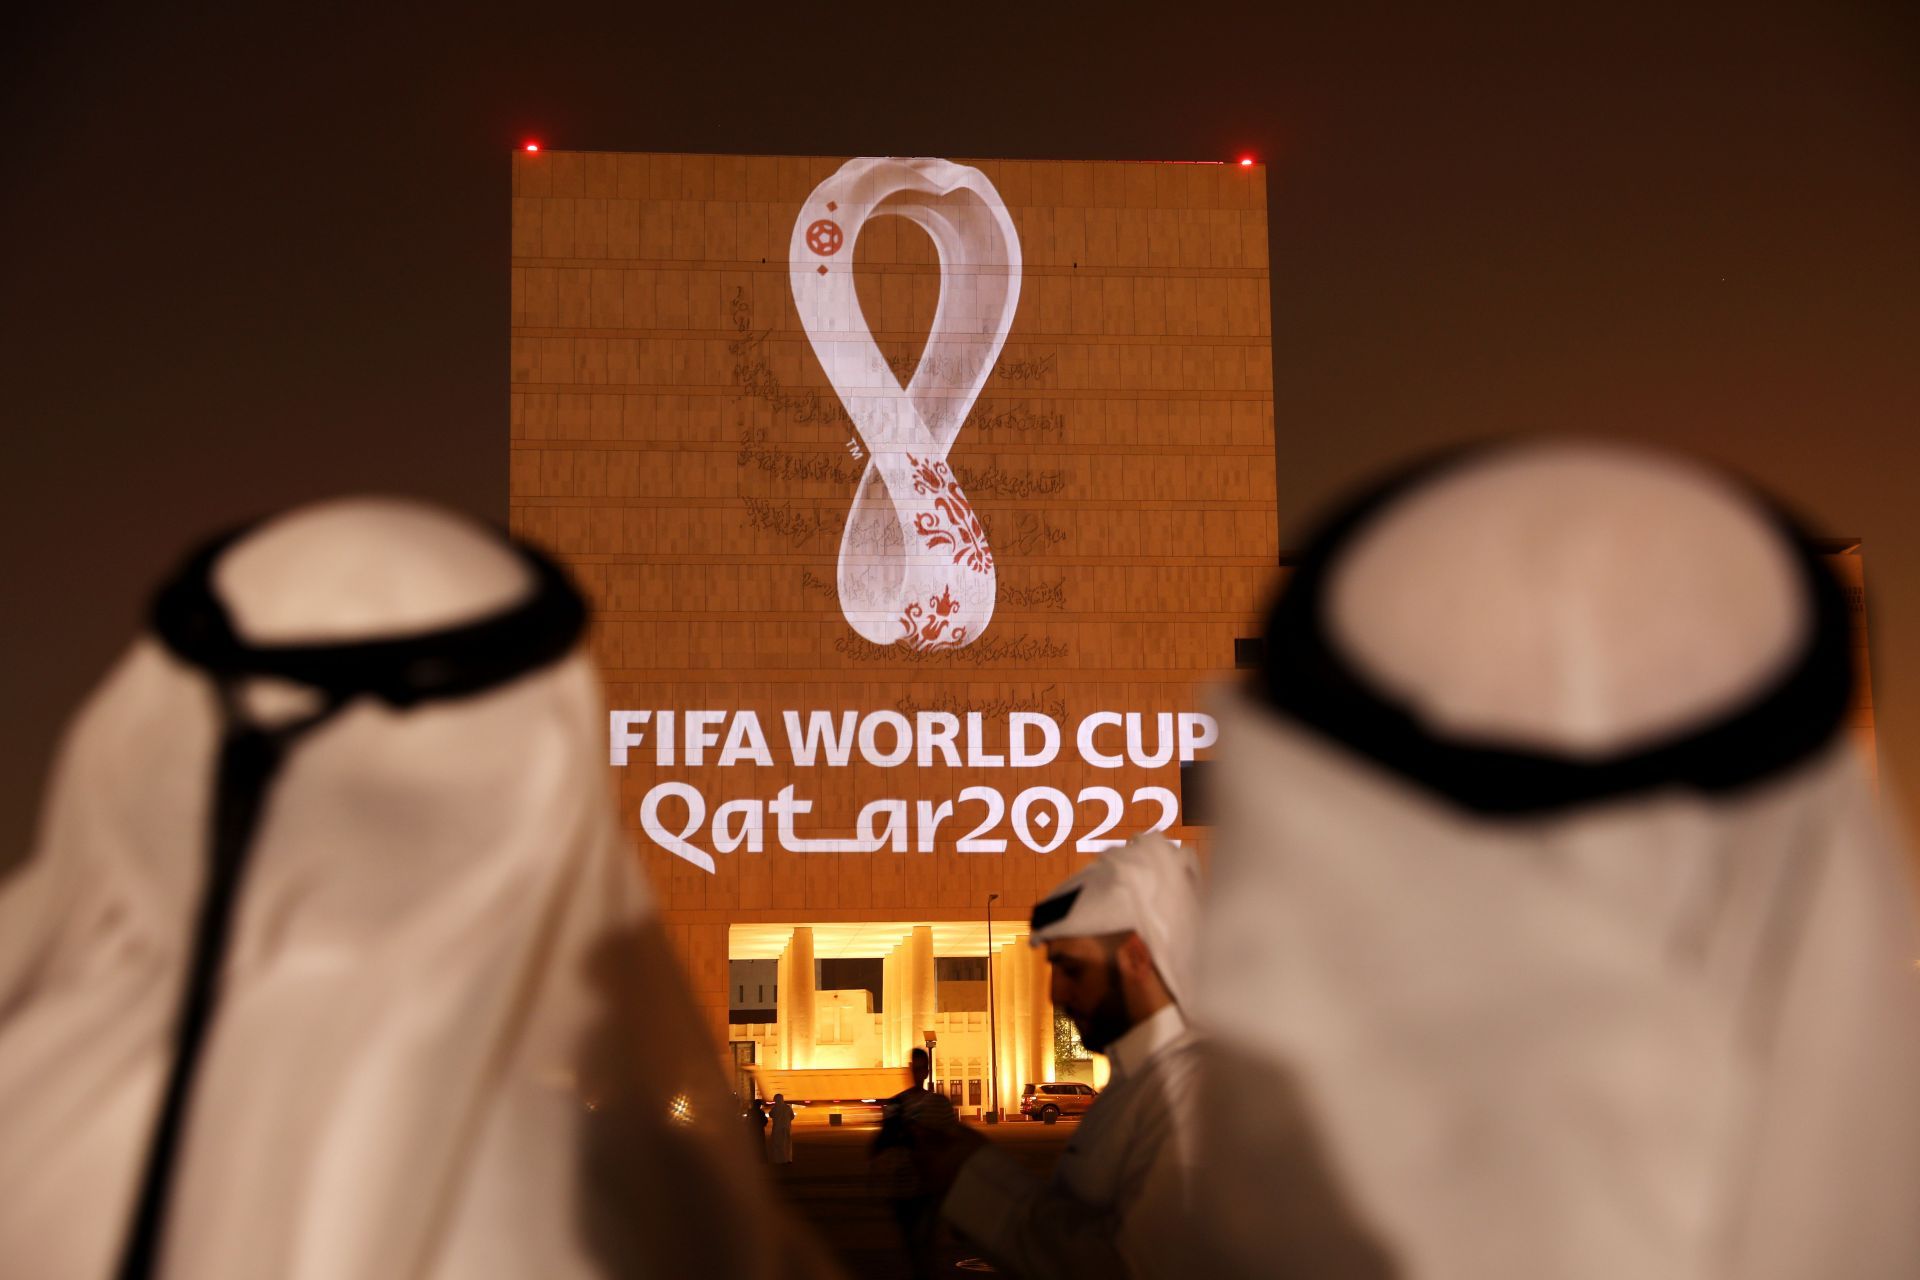 More FIFA tournaments are expected to take place in the Middle East during the coming years.